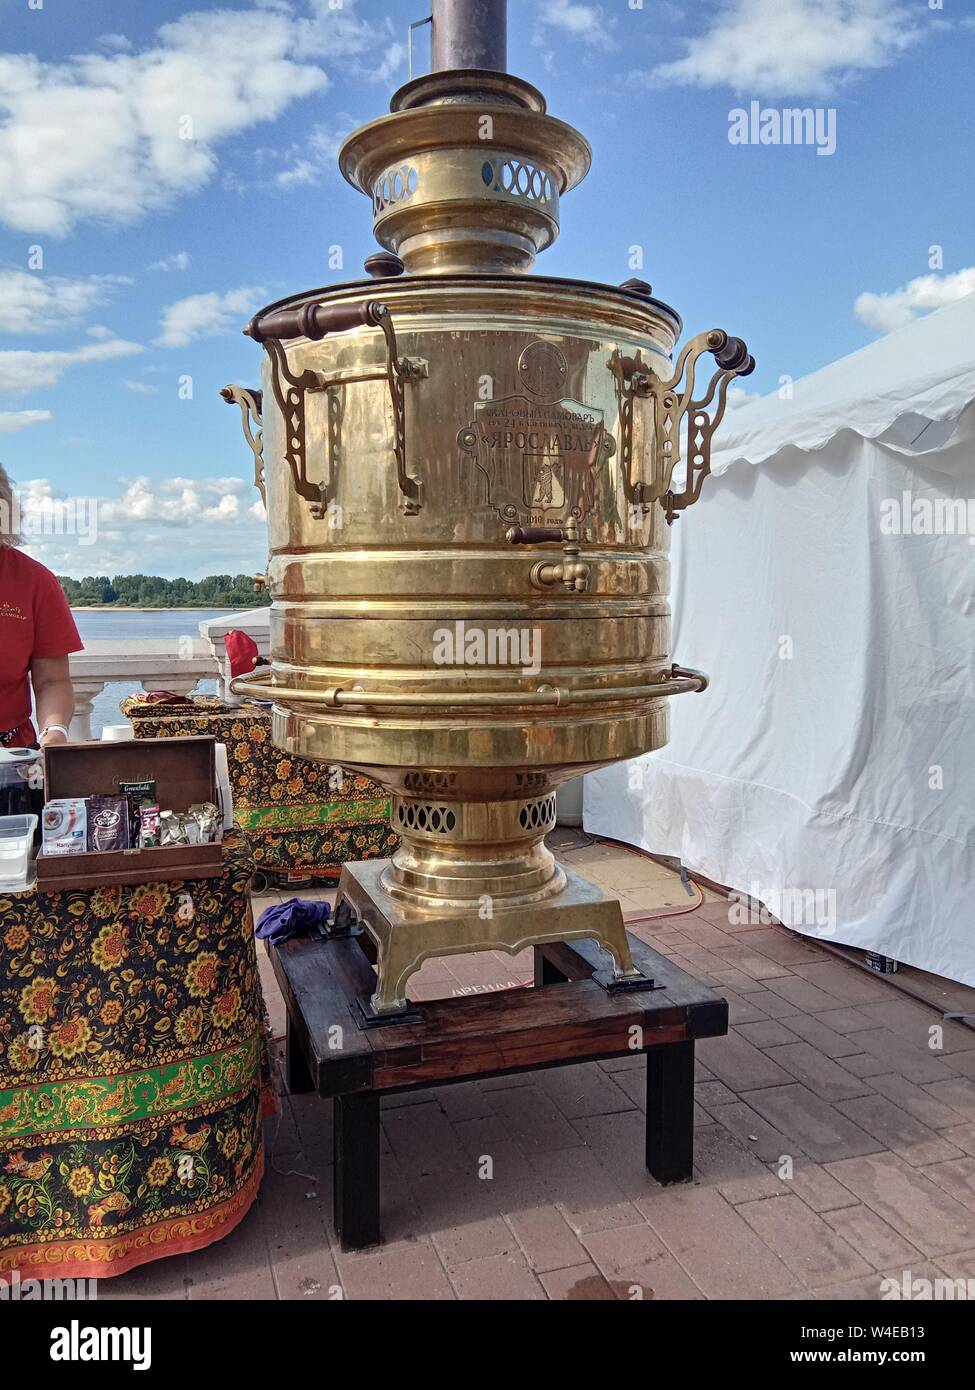 .Big samovar. A device for boiling water with wood. Big samovar. A device for boiling water with wood. Russia. Stock Photo